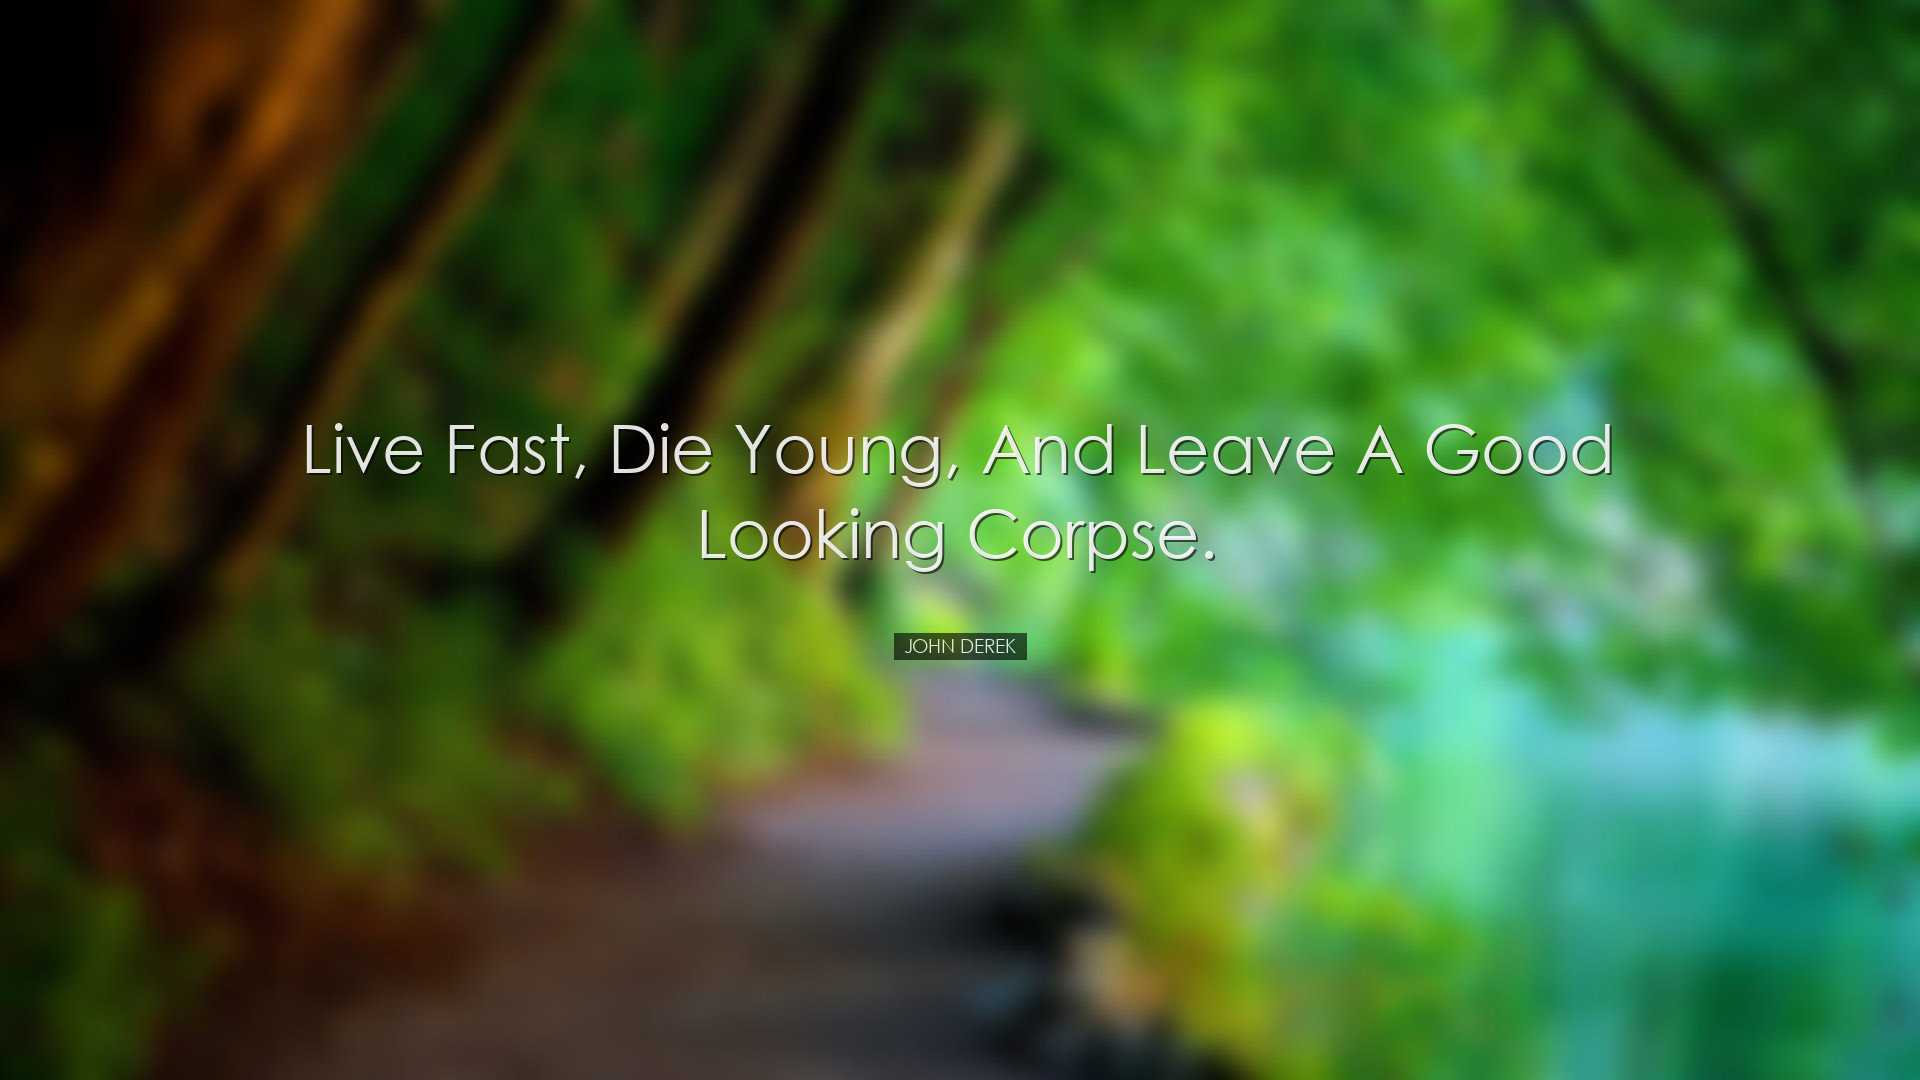 Live fast, die young, and leave a good looking corpse. - John Dere